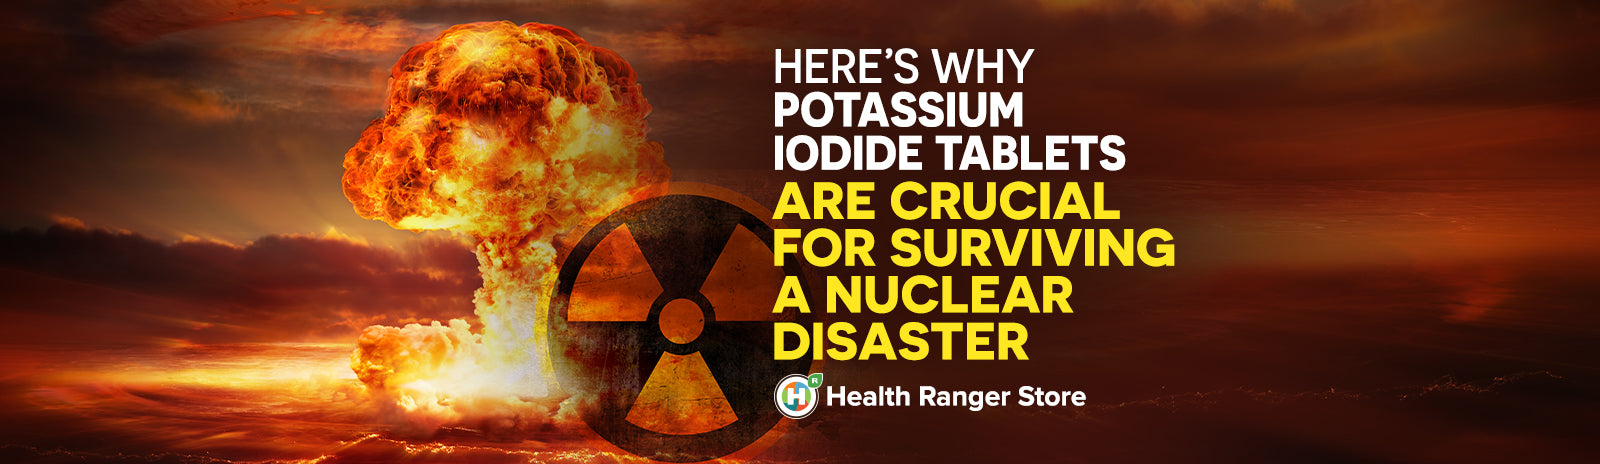 Why potassium iodide tablets are crucial for surviving a nuclear disaster